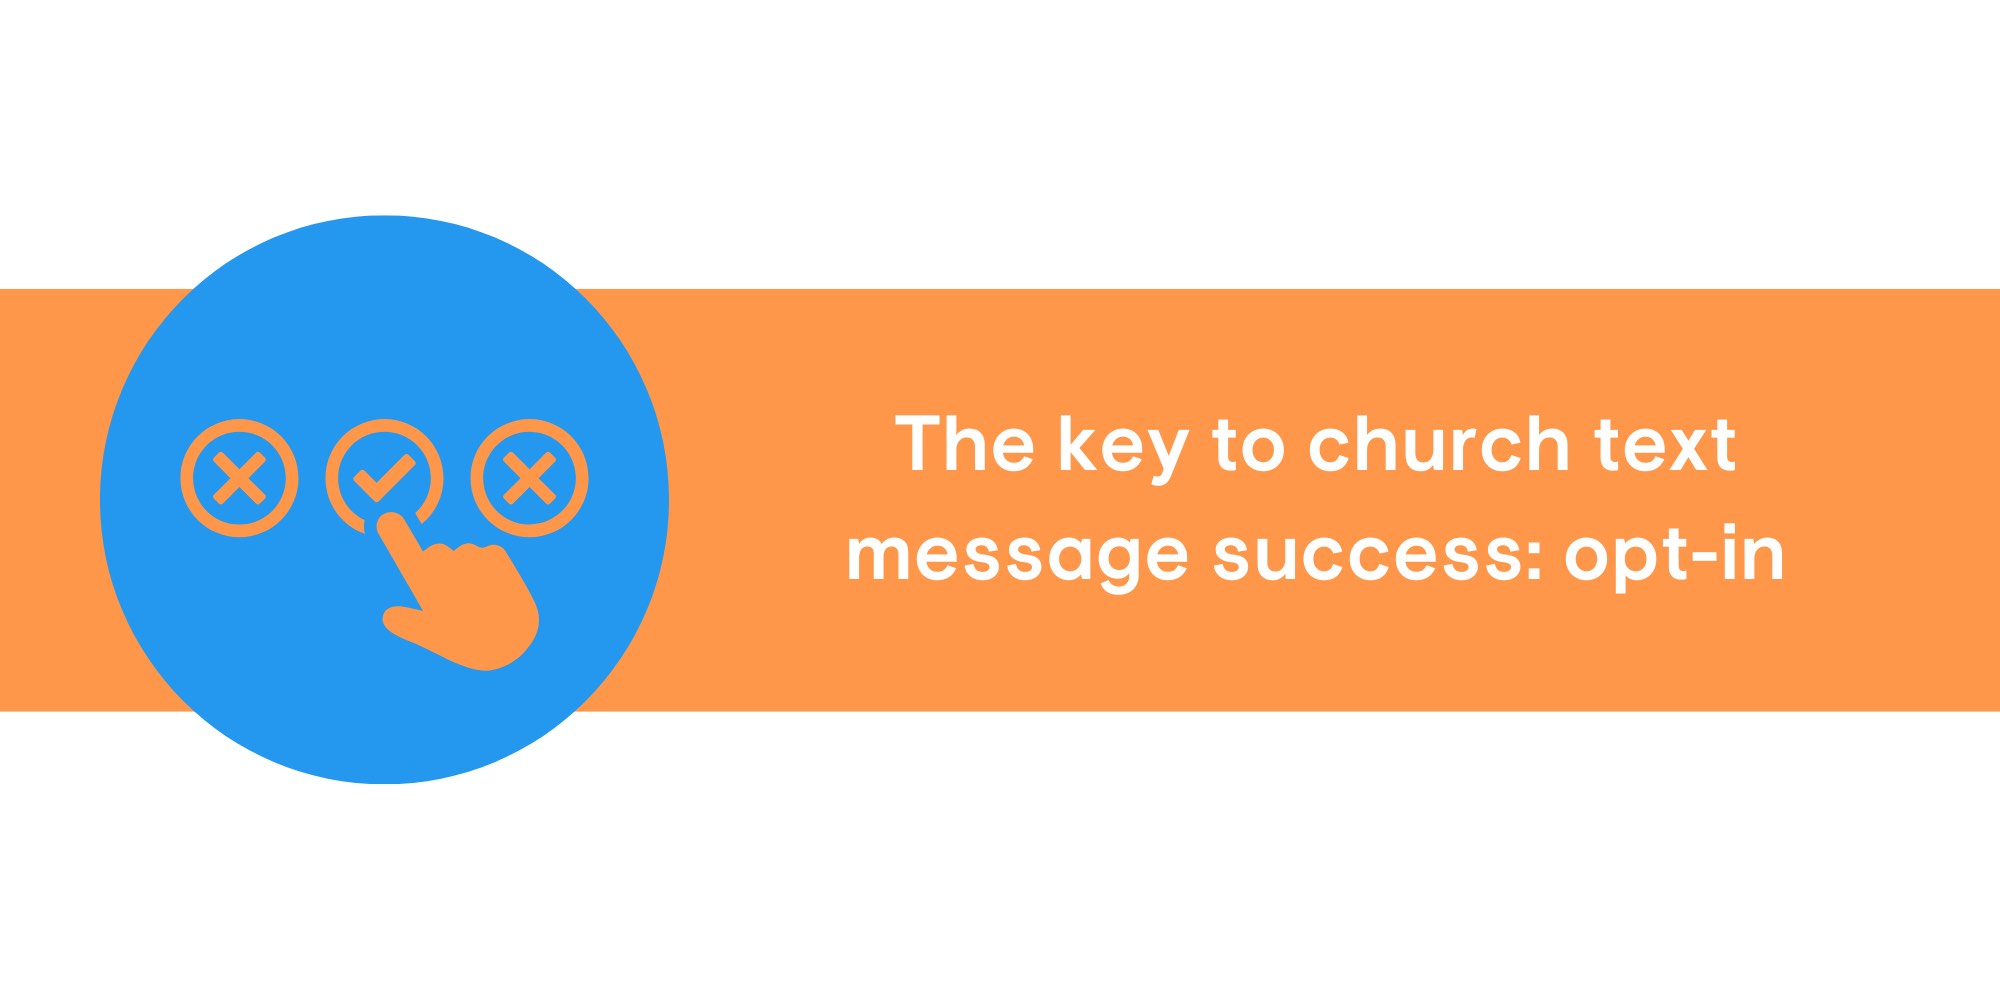 Opting into texting is crucial for church mass texting success